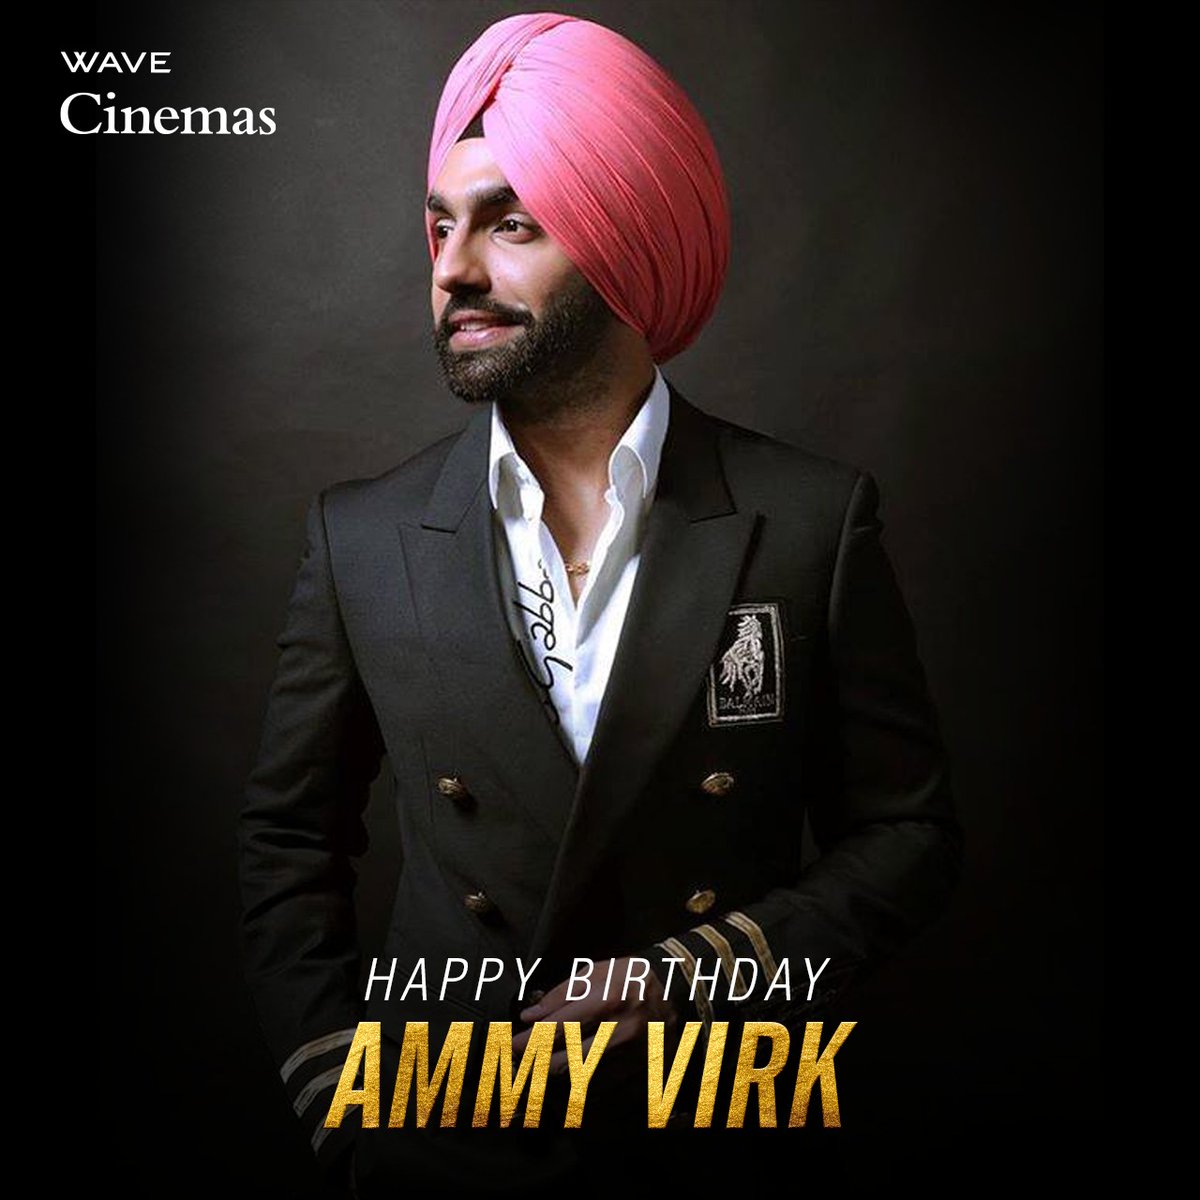 Wishing a very Happy Birthday to the handsome and talented @AmmyVirk

May you have a great year ahead.

#happybirthdayammyvirk #hbdammyvirk #Wavecinemas #HappyBirthday #punjabiartist